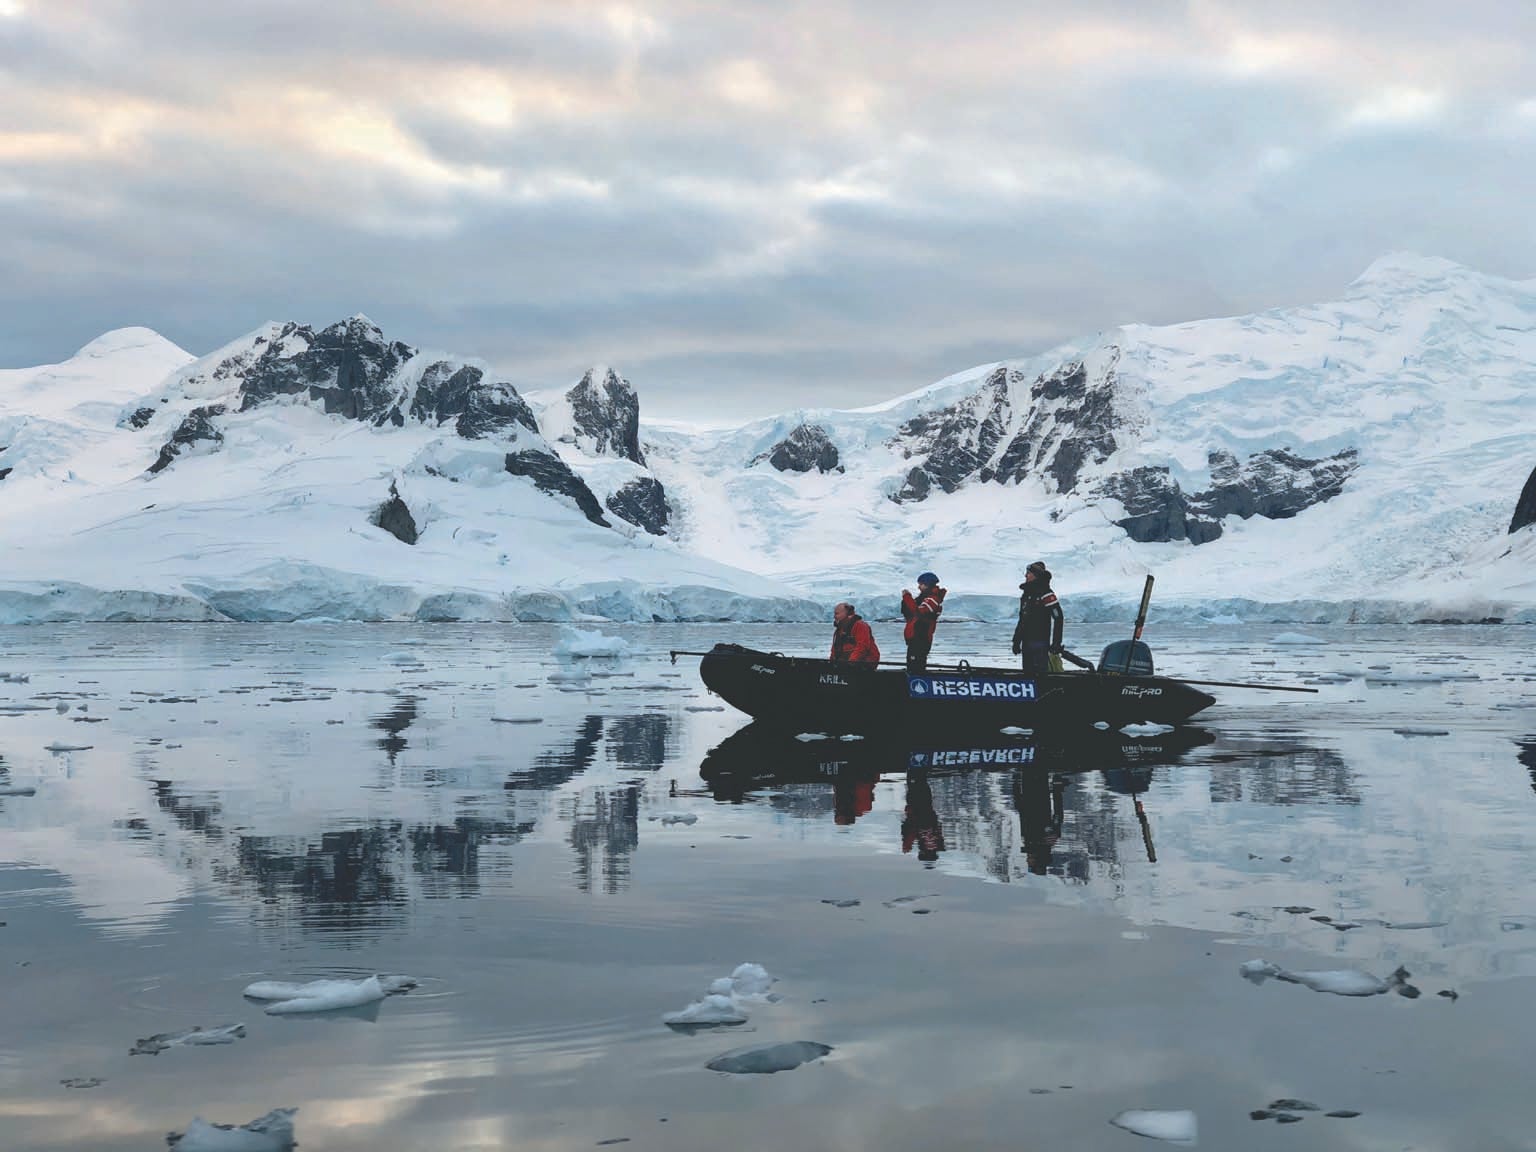 Three people in a small whale tagging boat shown in Antarctic water with snow covered land in background.